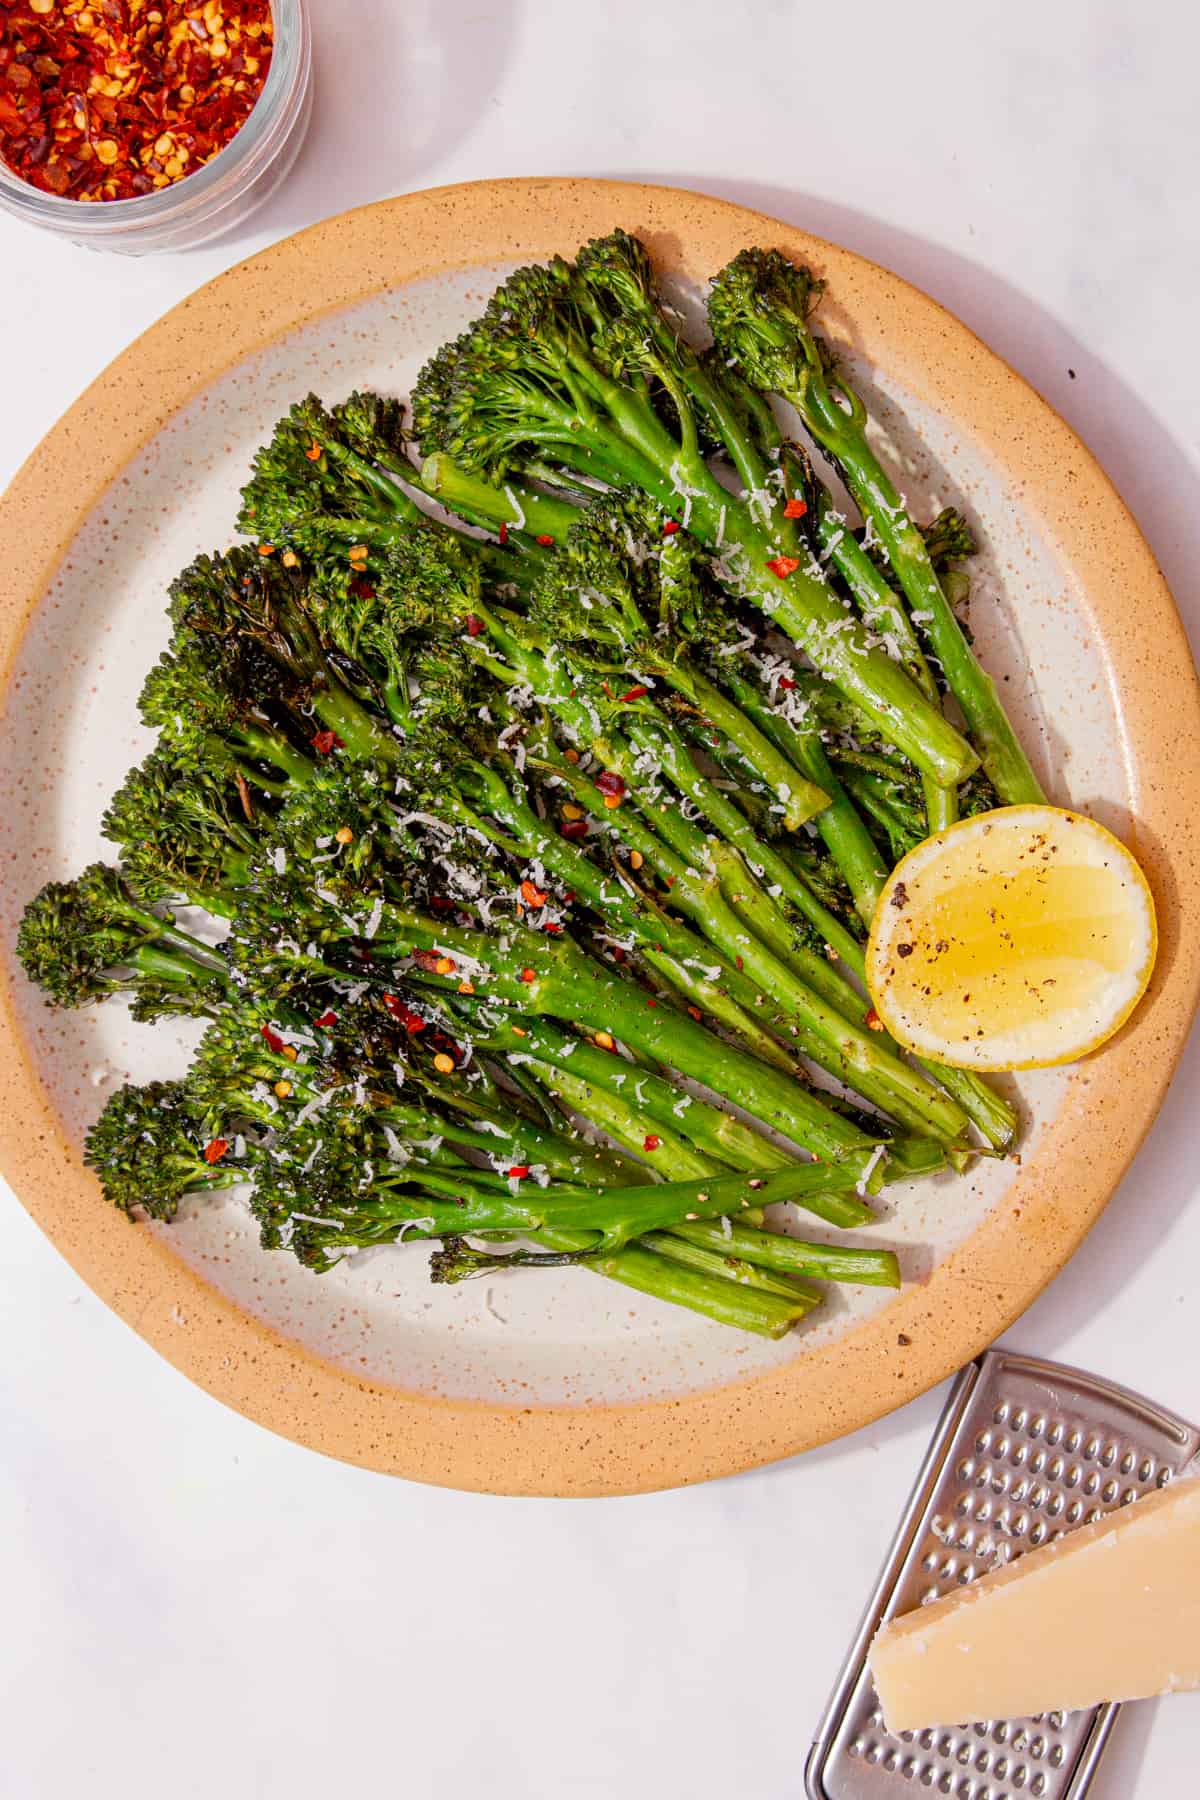 Tenderstem broccoli displayed on a plate with a wedge of lemon and a small bowl of chilli flakes in partial view.